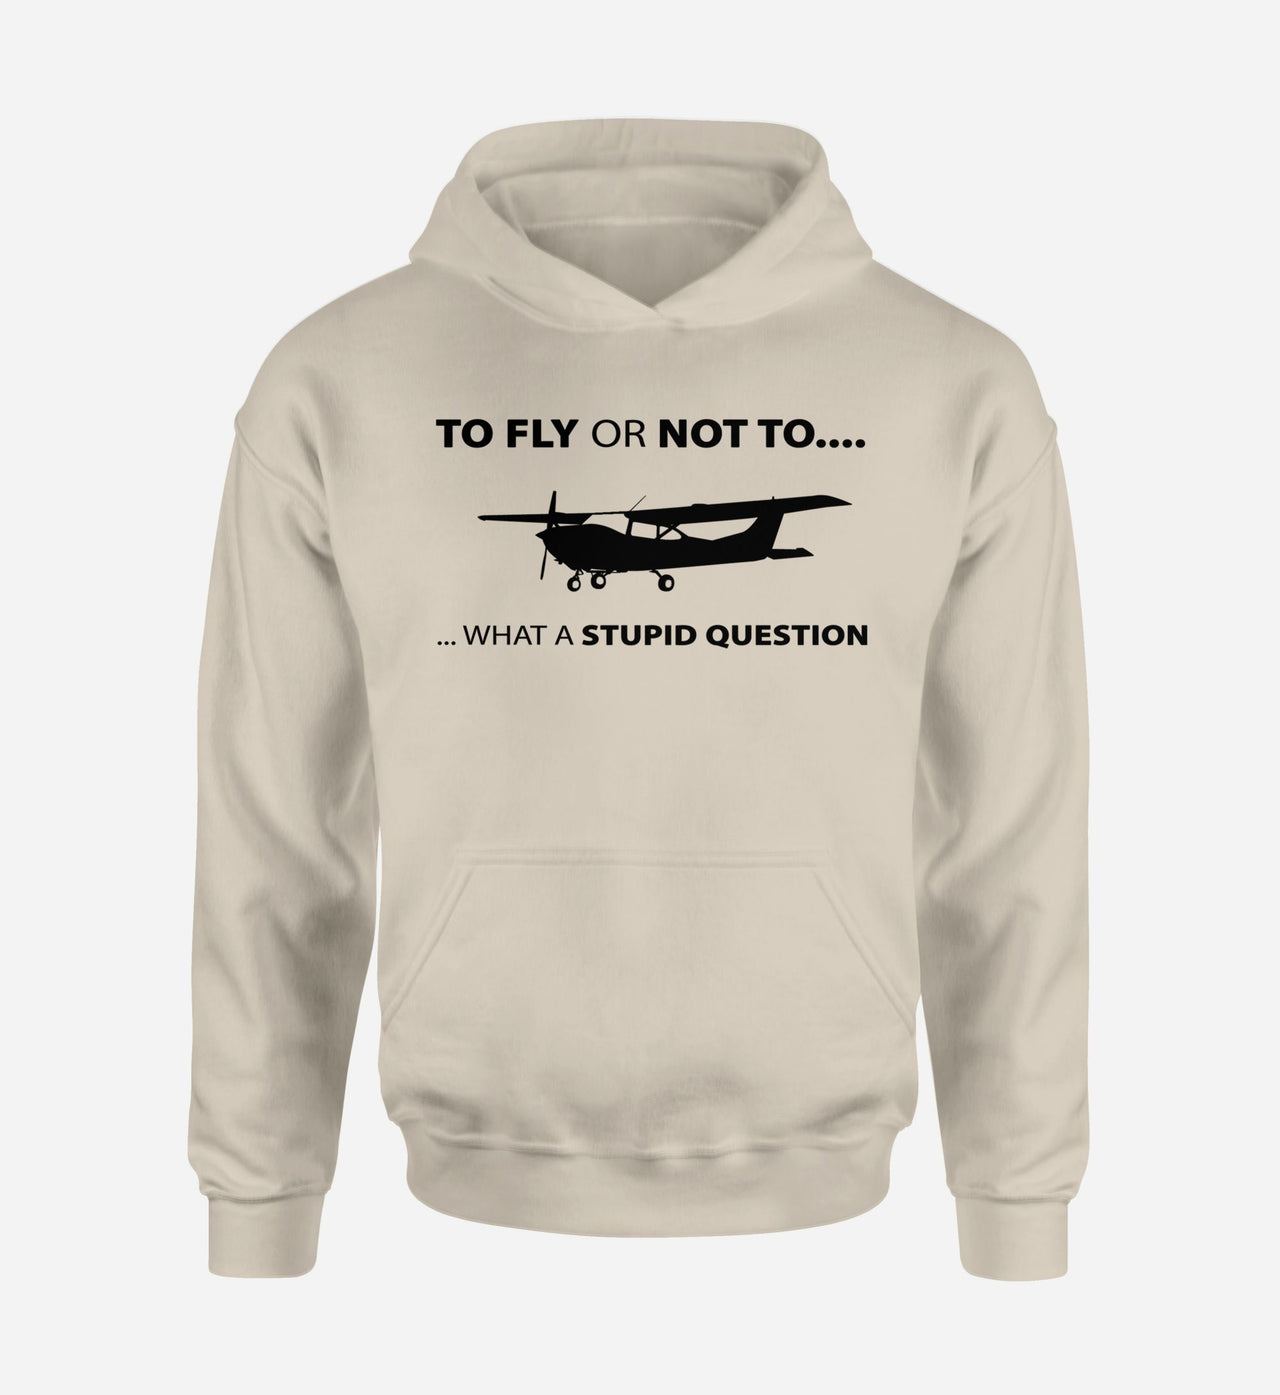 To Fly or Not To What a Stupid Question Designed Hoodies